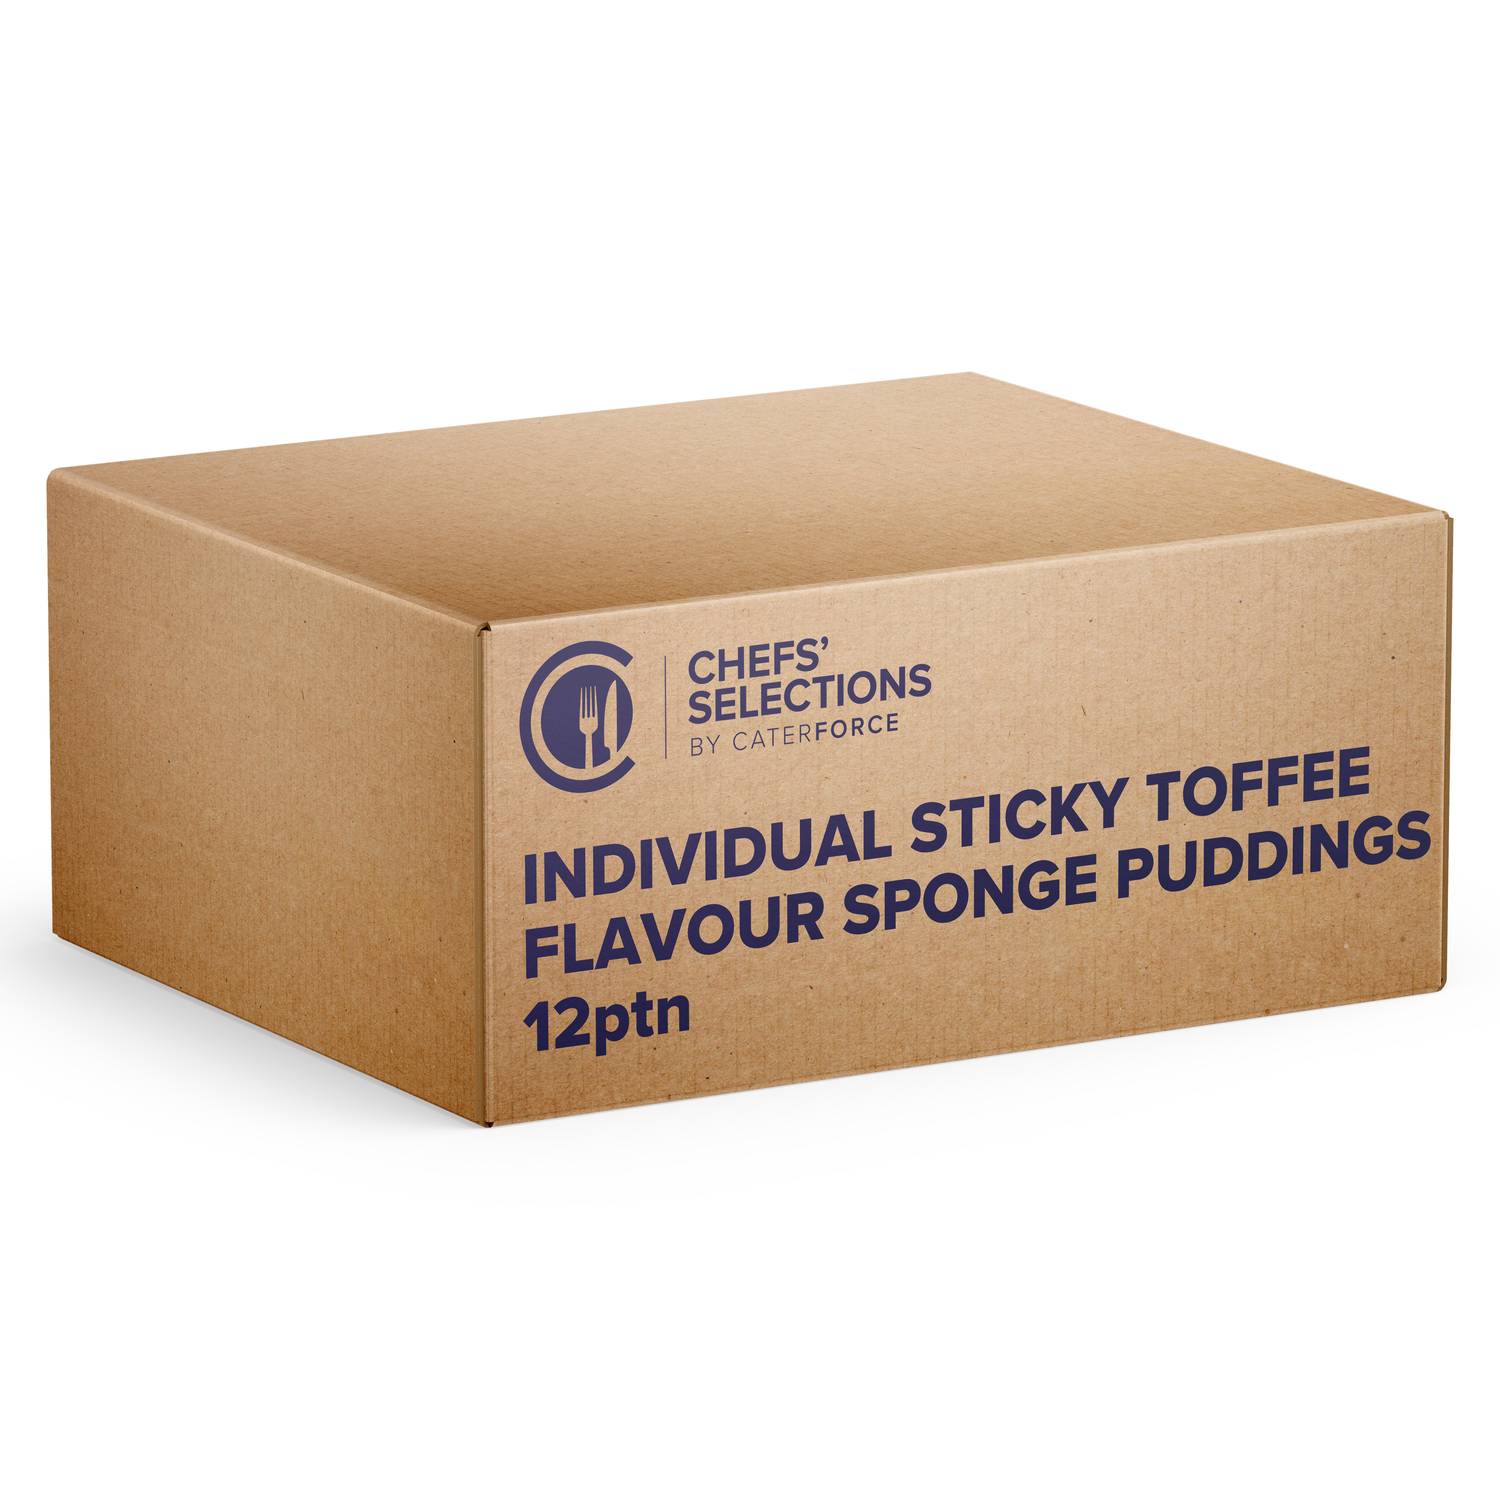 Chefs’ Selections Individual Sticky Toffee Flavour Sponge Puddings (1 x 12)